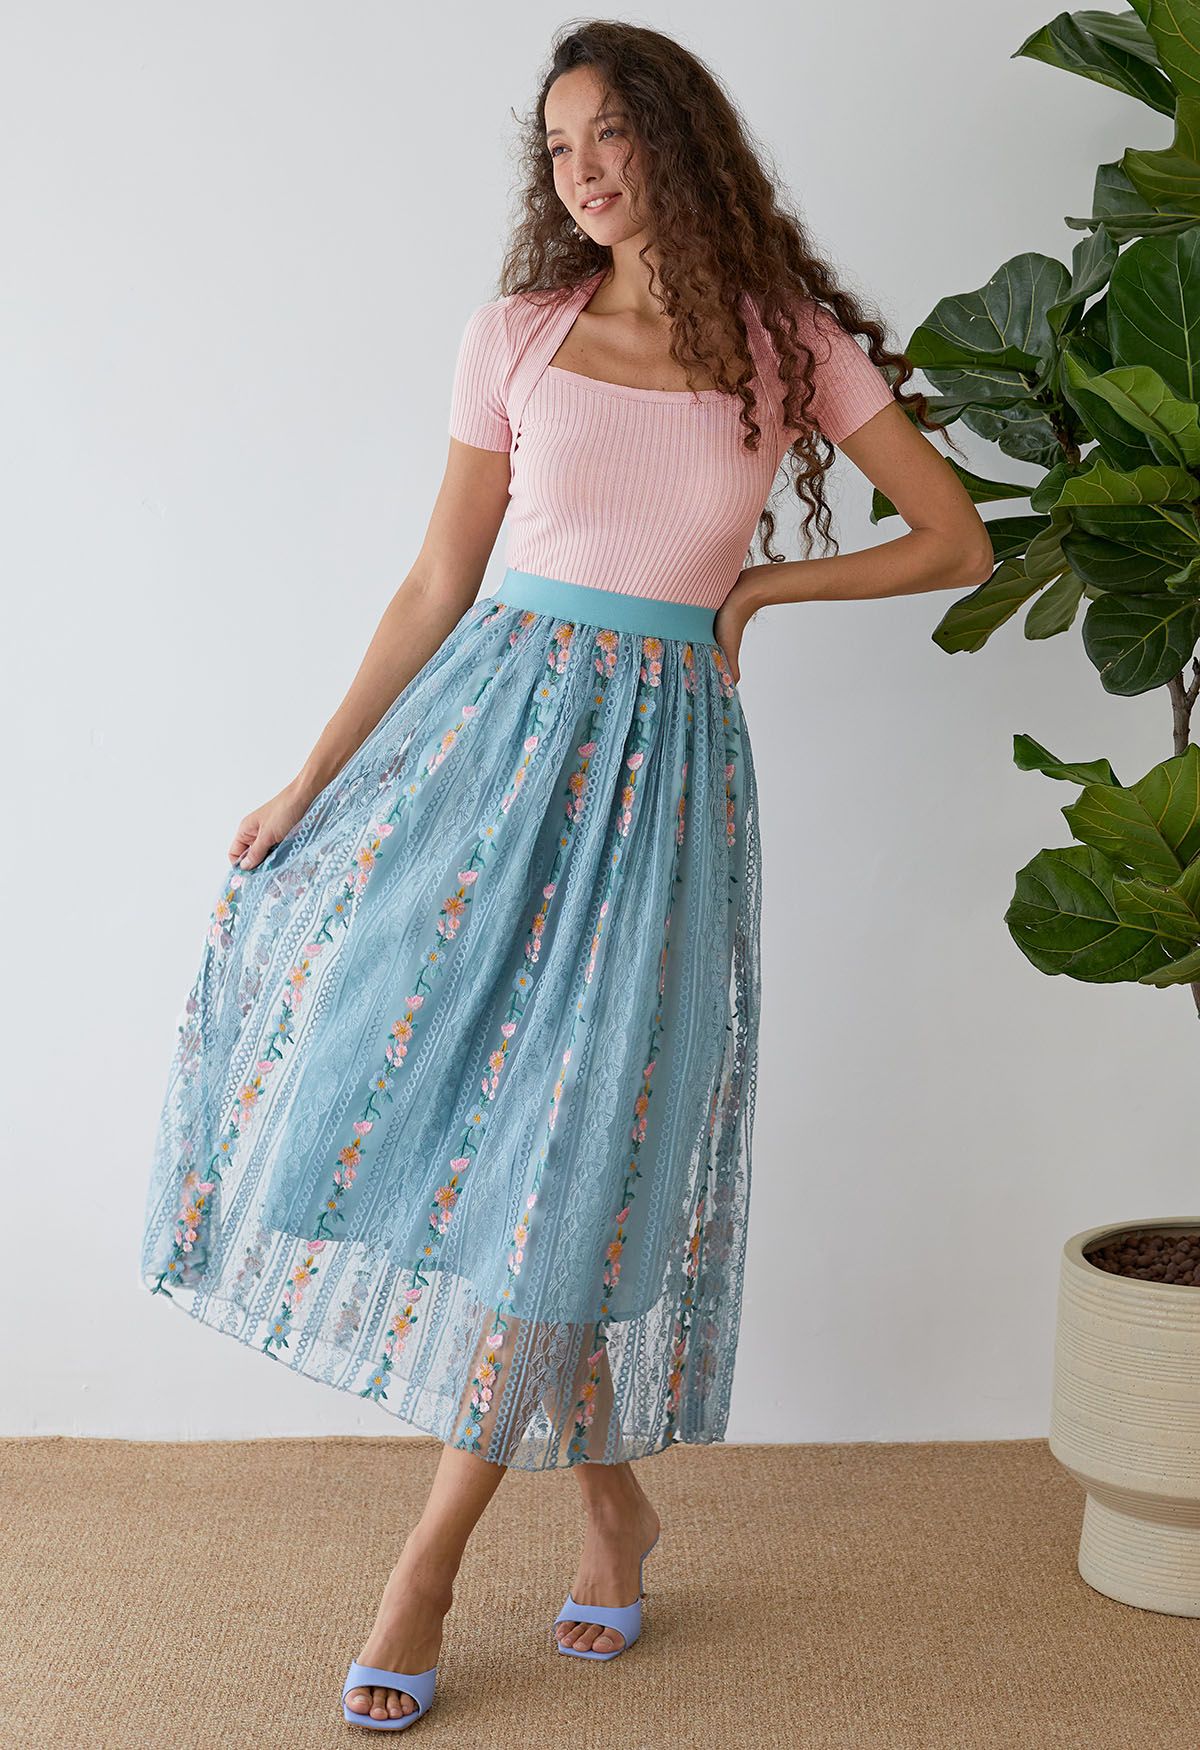 Flower Chain Embroidered Mesh Skirt in Dusty Blue